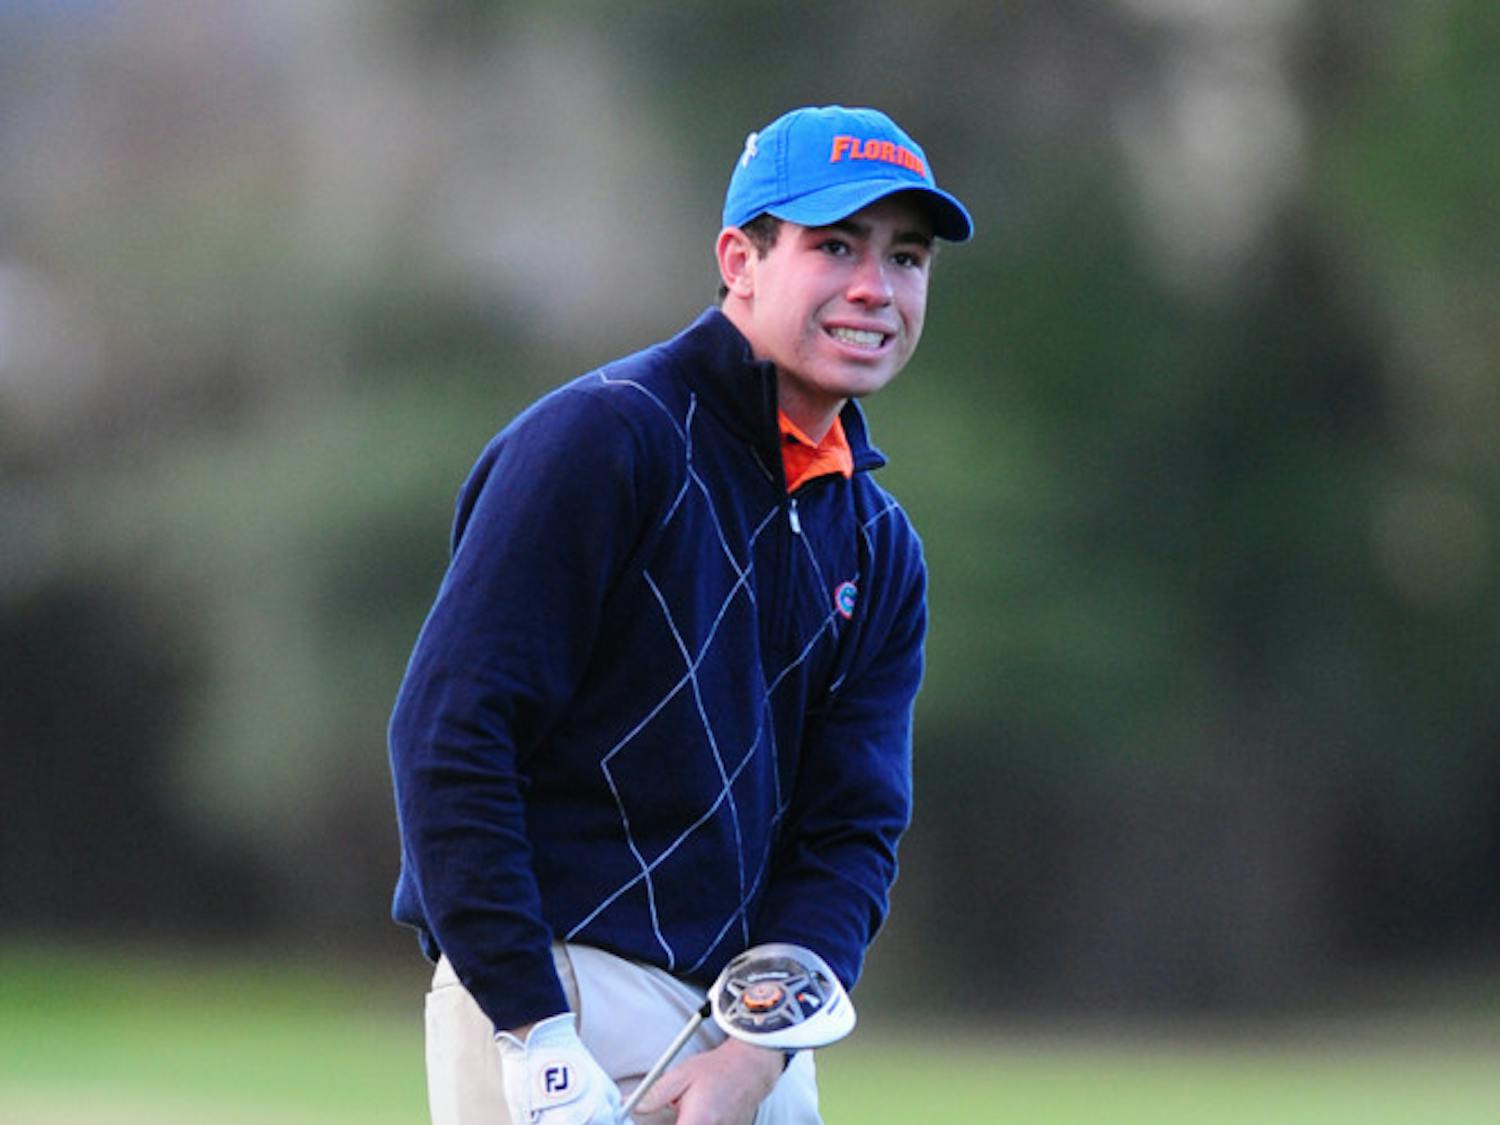 Richard Donegan stands on the course during the Suntrust Gator Invitational on Feb. 15 at the Mark Bostick Golf Course.